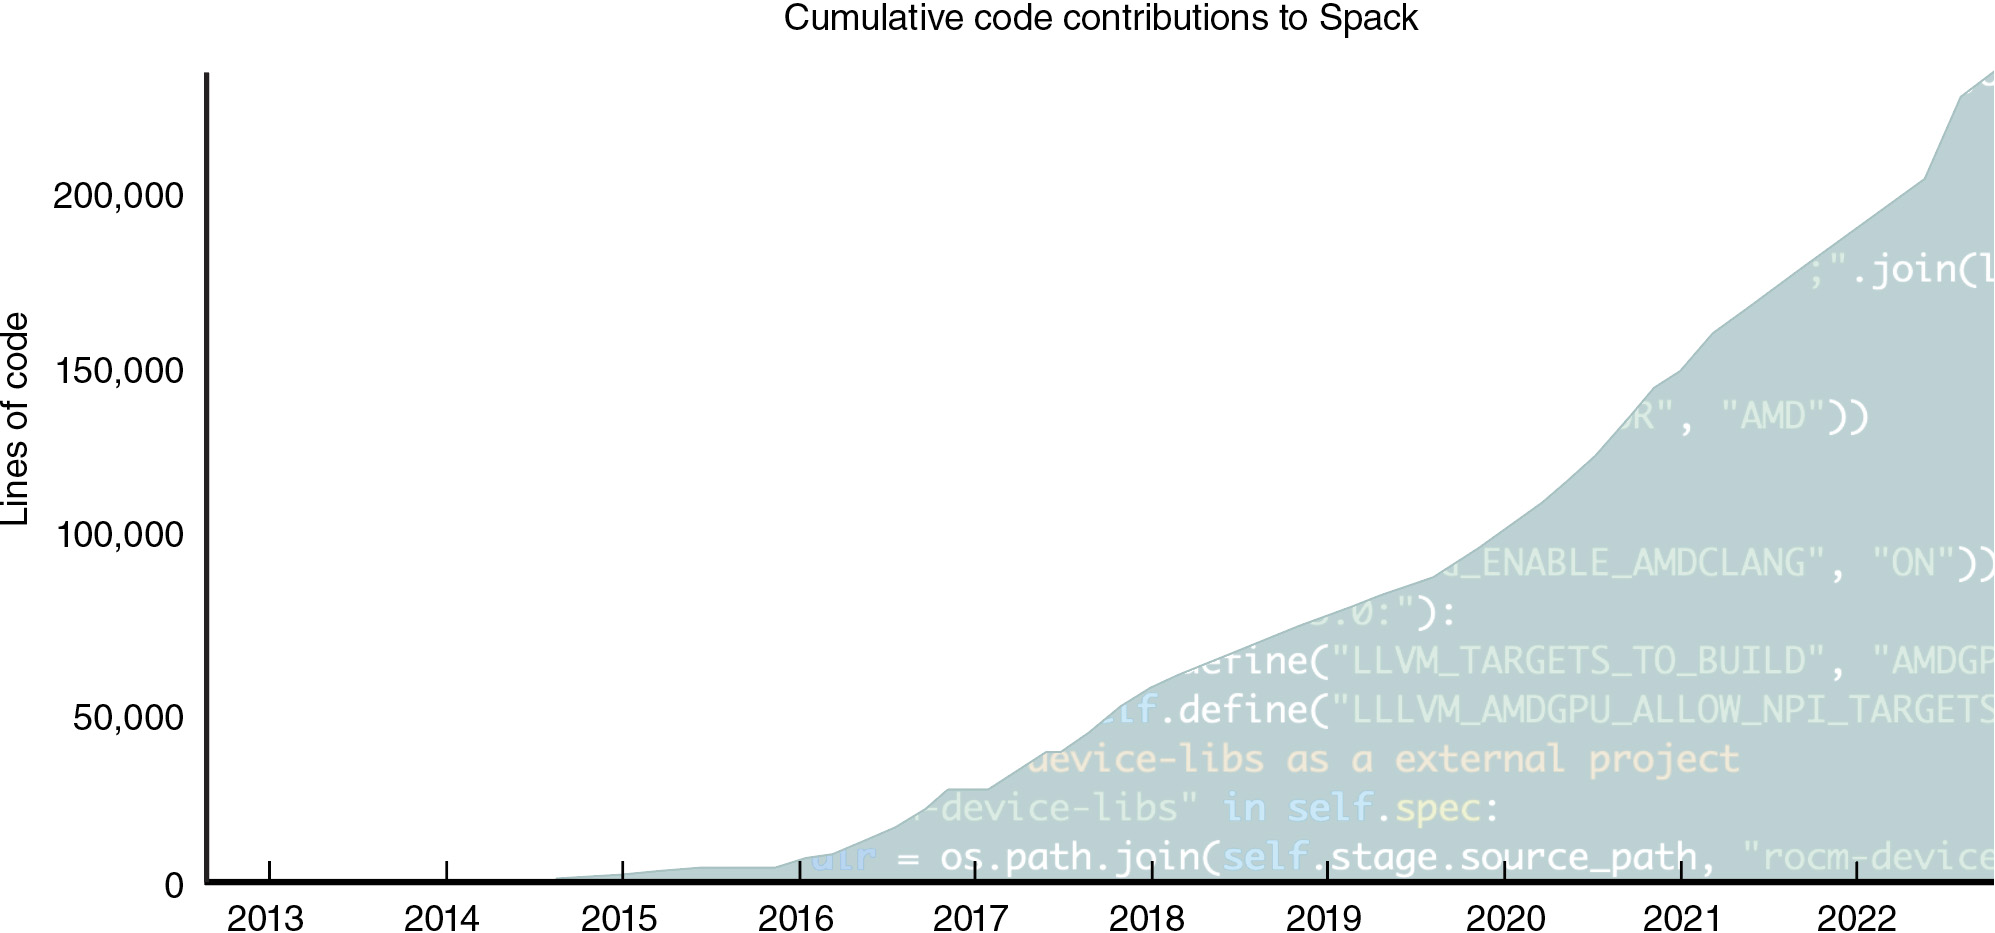 a graph indicating an increase in lines of code from zero to over 200,000 on the y-axis over a time period covering 2013 to 2023 on the x-axis